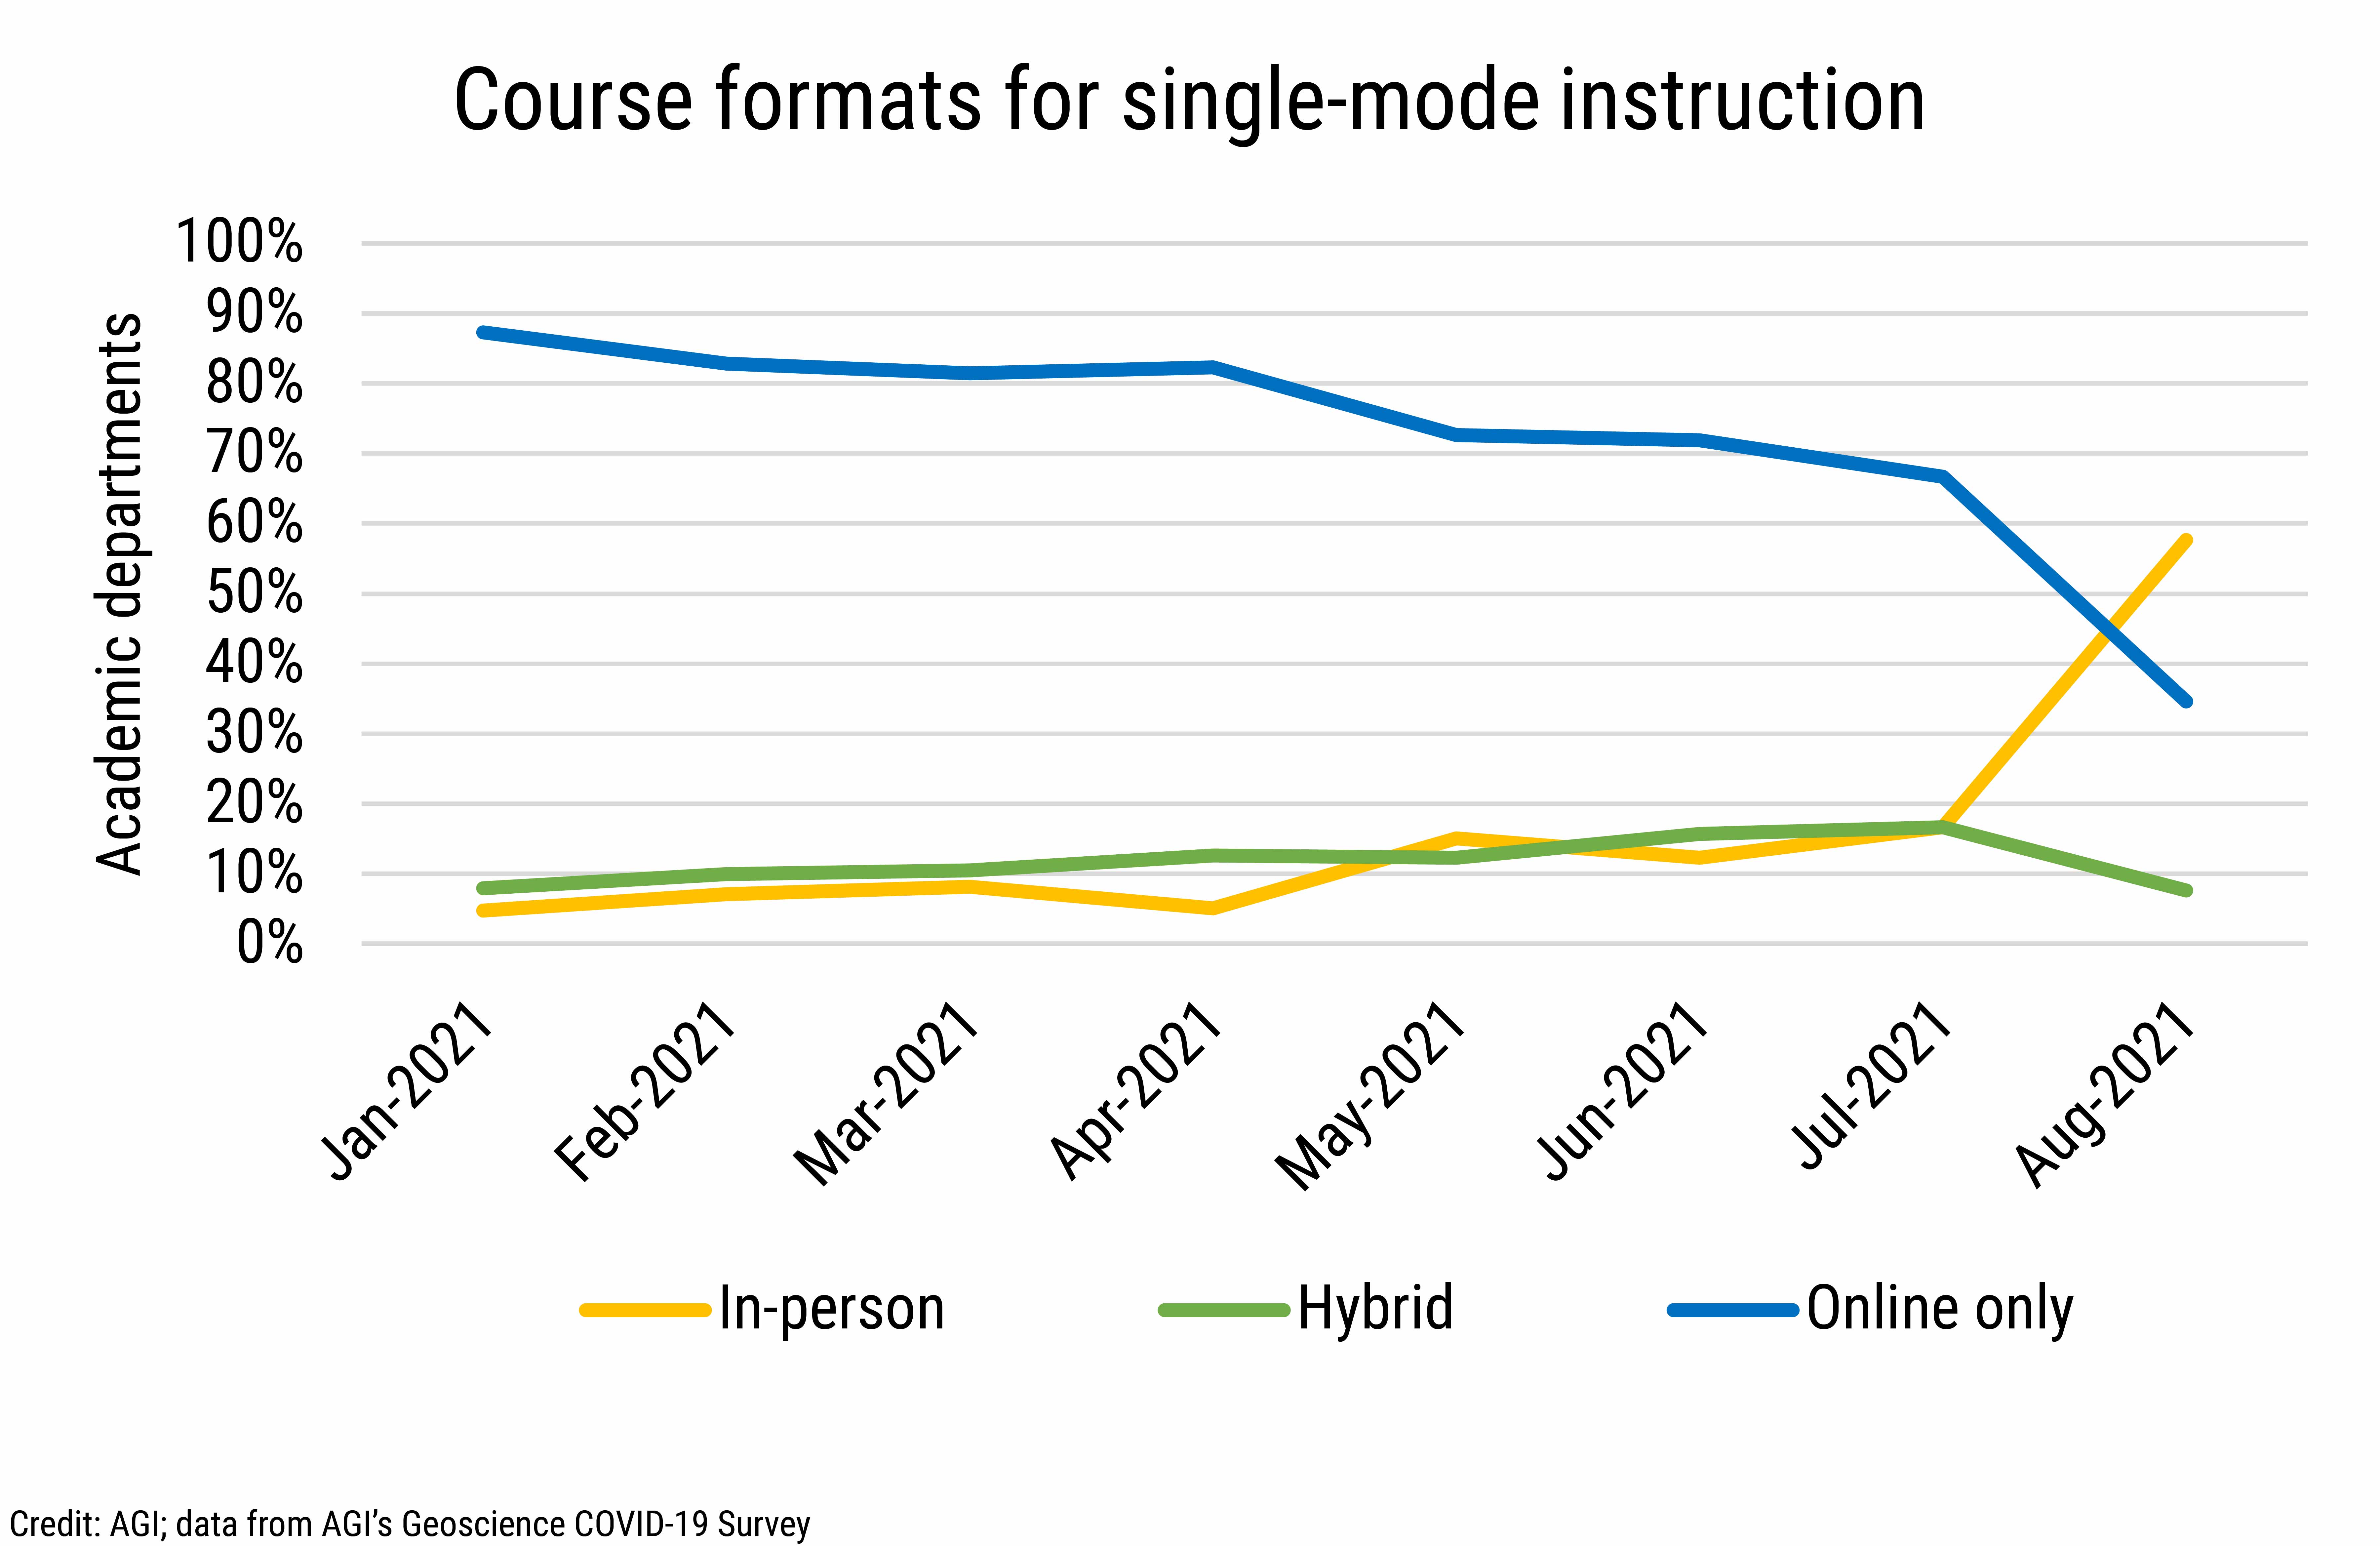 DB_2021-027 chart 02: Course instructional formats for single-mode instruction (Credit: AGI; data from AGI's Geoscience COVID-19 Survey)